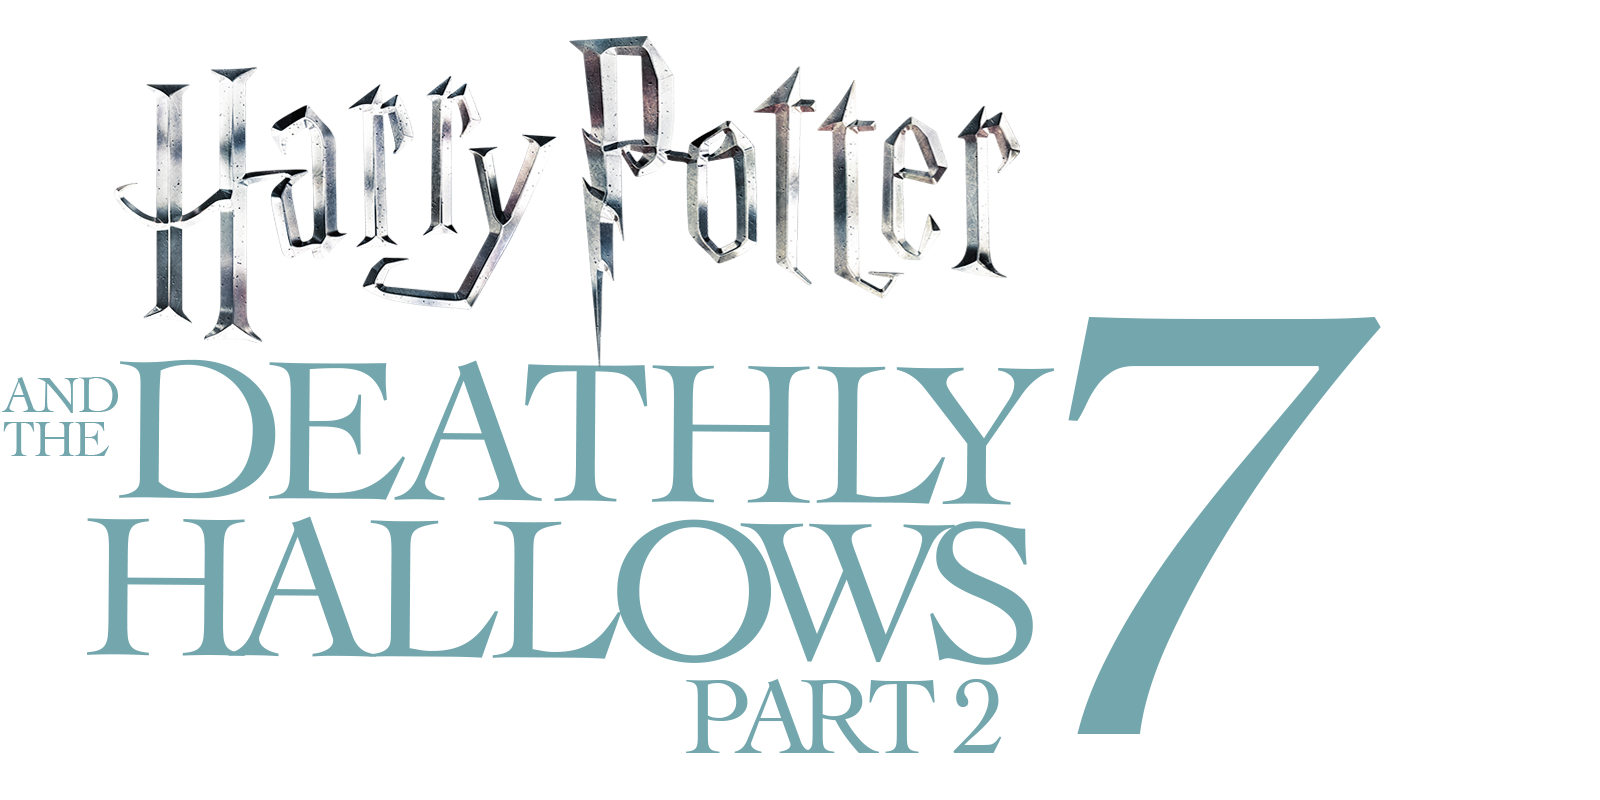 harry potter and the deathly hallows part 2 watch online